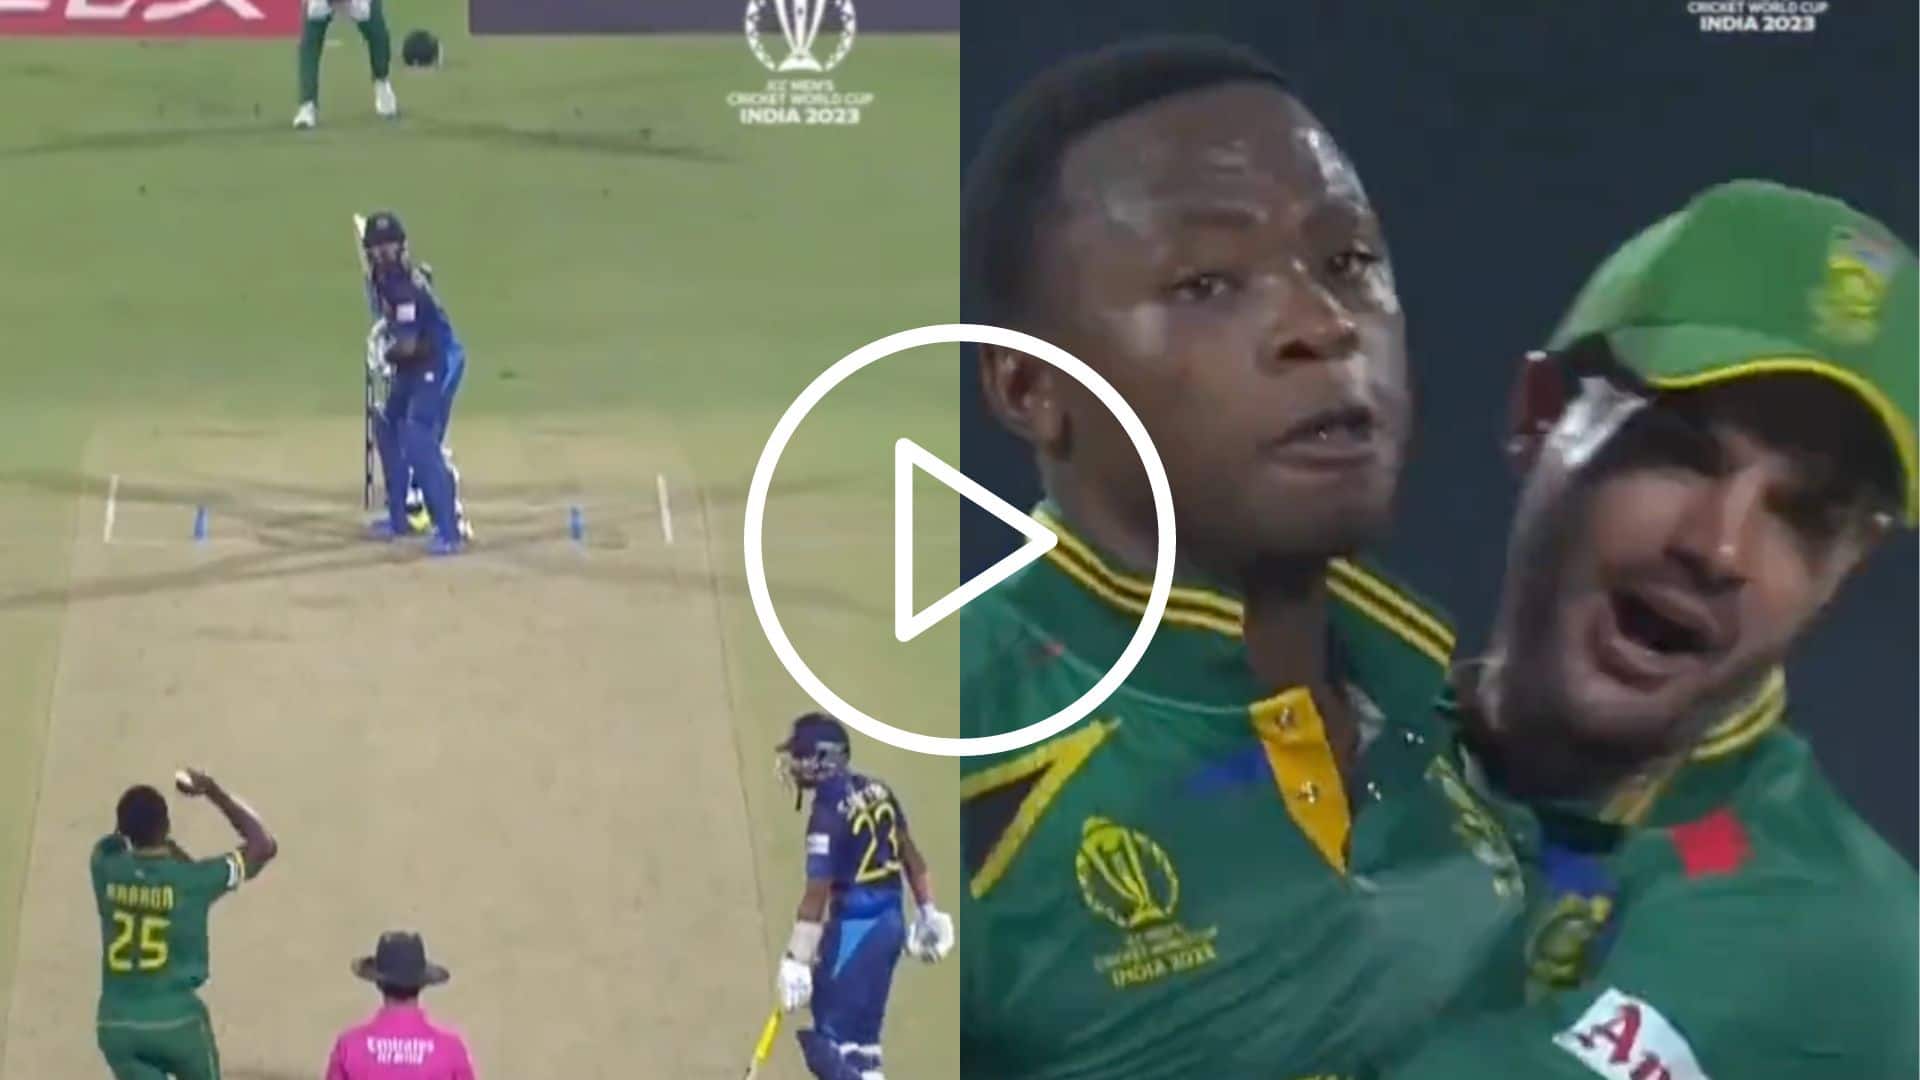 [Watch] Kagiso Rabada ‘Pumped’ After Dismissing Kusal Mendis With A Beauty